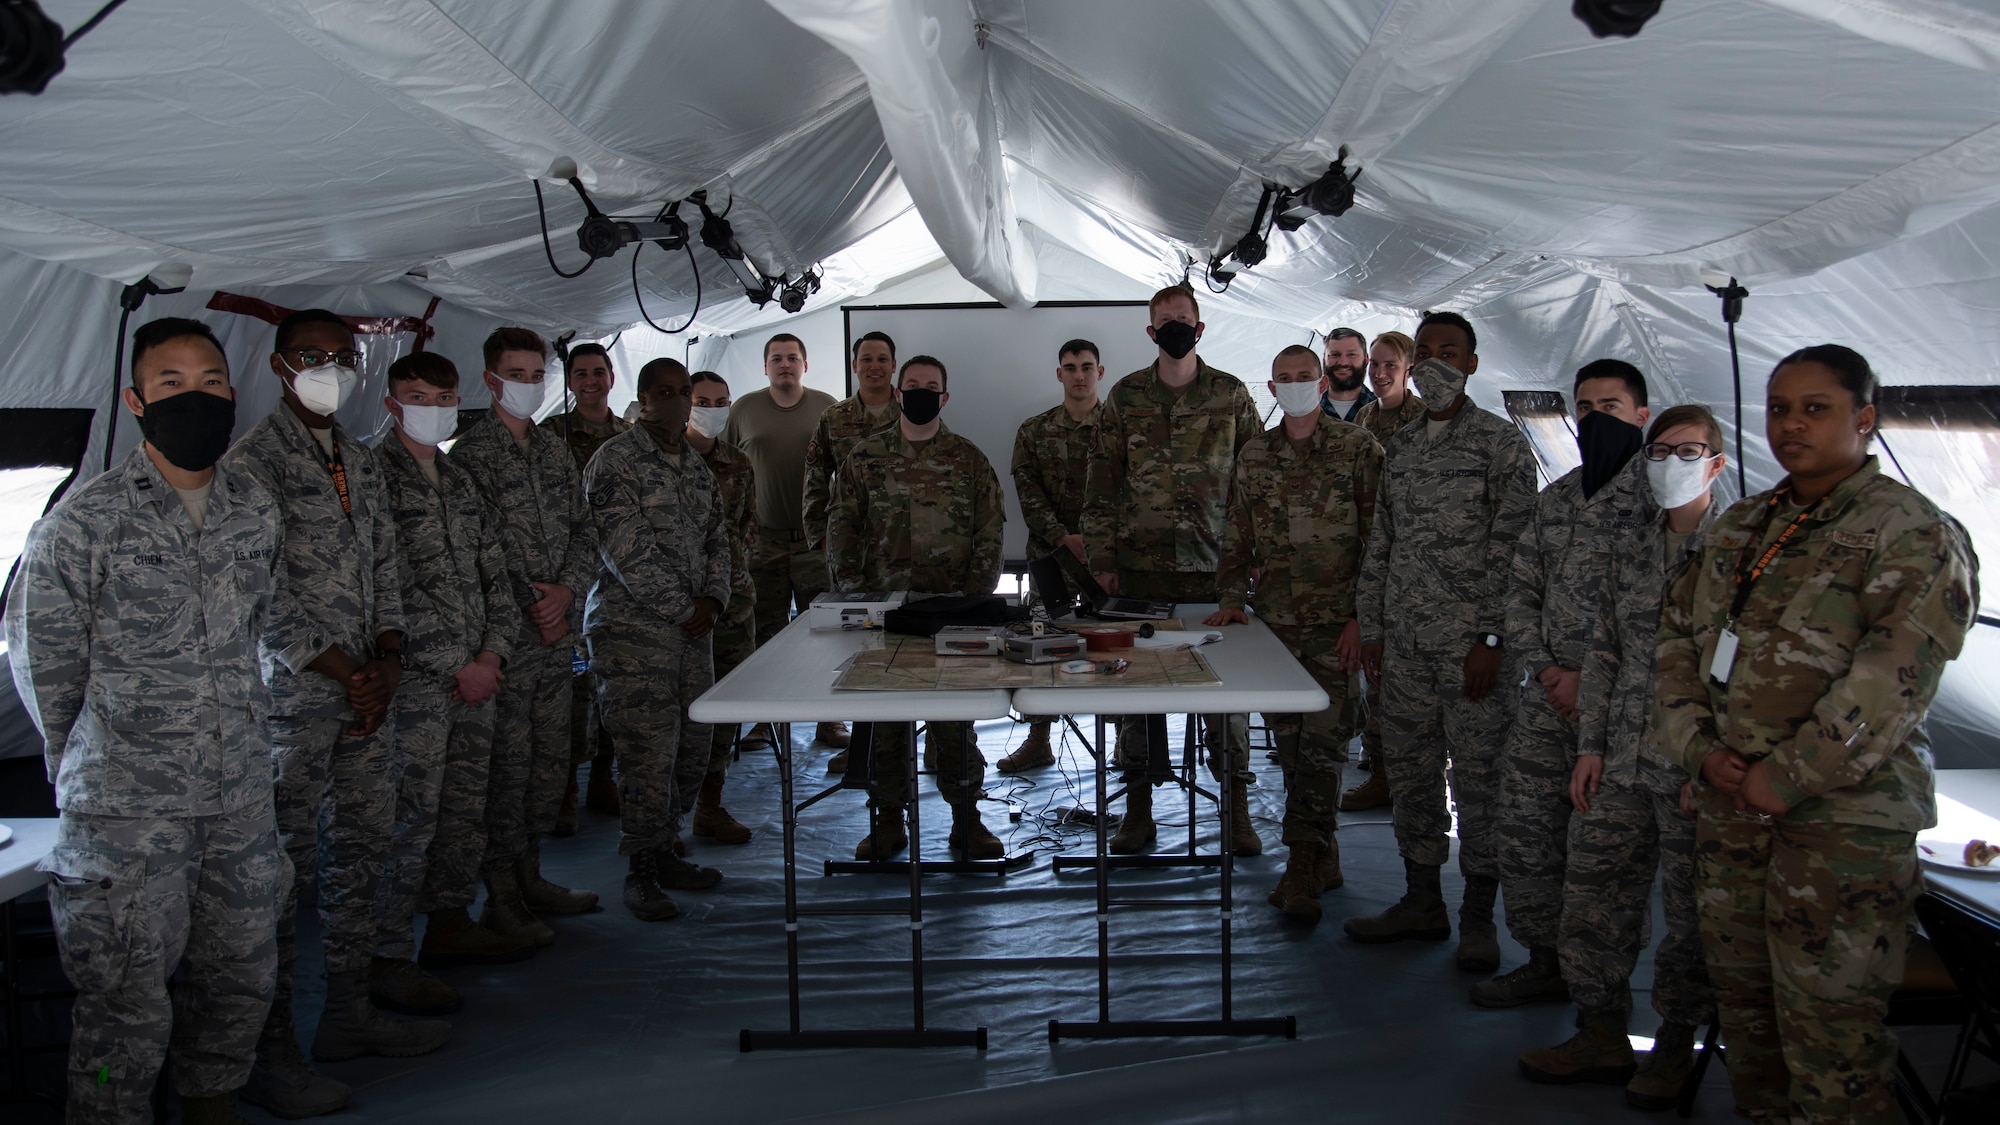 366th Fighter Wing A2 Airmen pose for a group photo in a fully set up mock Agile Combat Employment (ACE) mission planning cell, June 3, 2020, on Mountain Home Air Force Base, Idaho. This is the first time A2 Airmen had fully assembled the ACE-MPC. (U.S. Air Force photo by Airman 1st Class Nicholas Swift